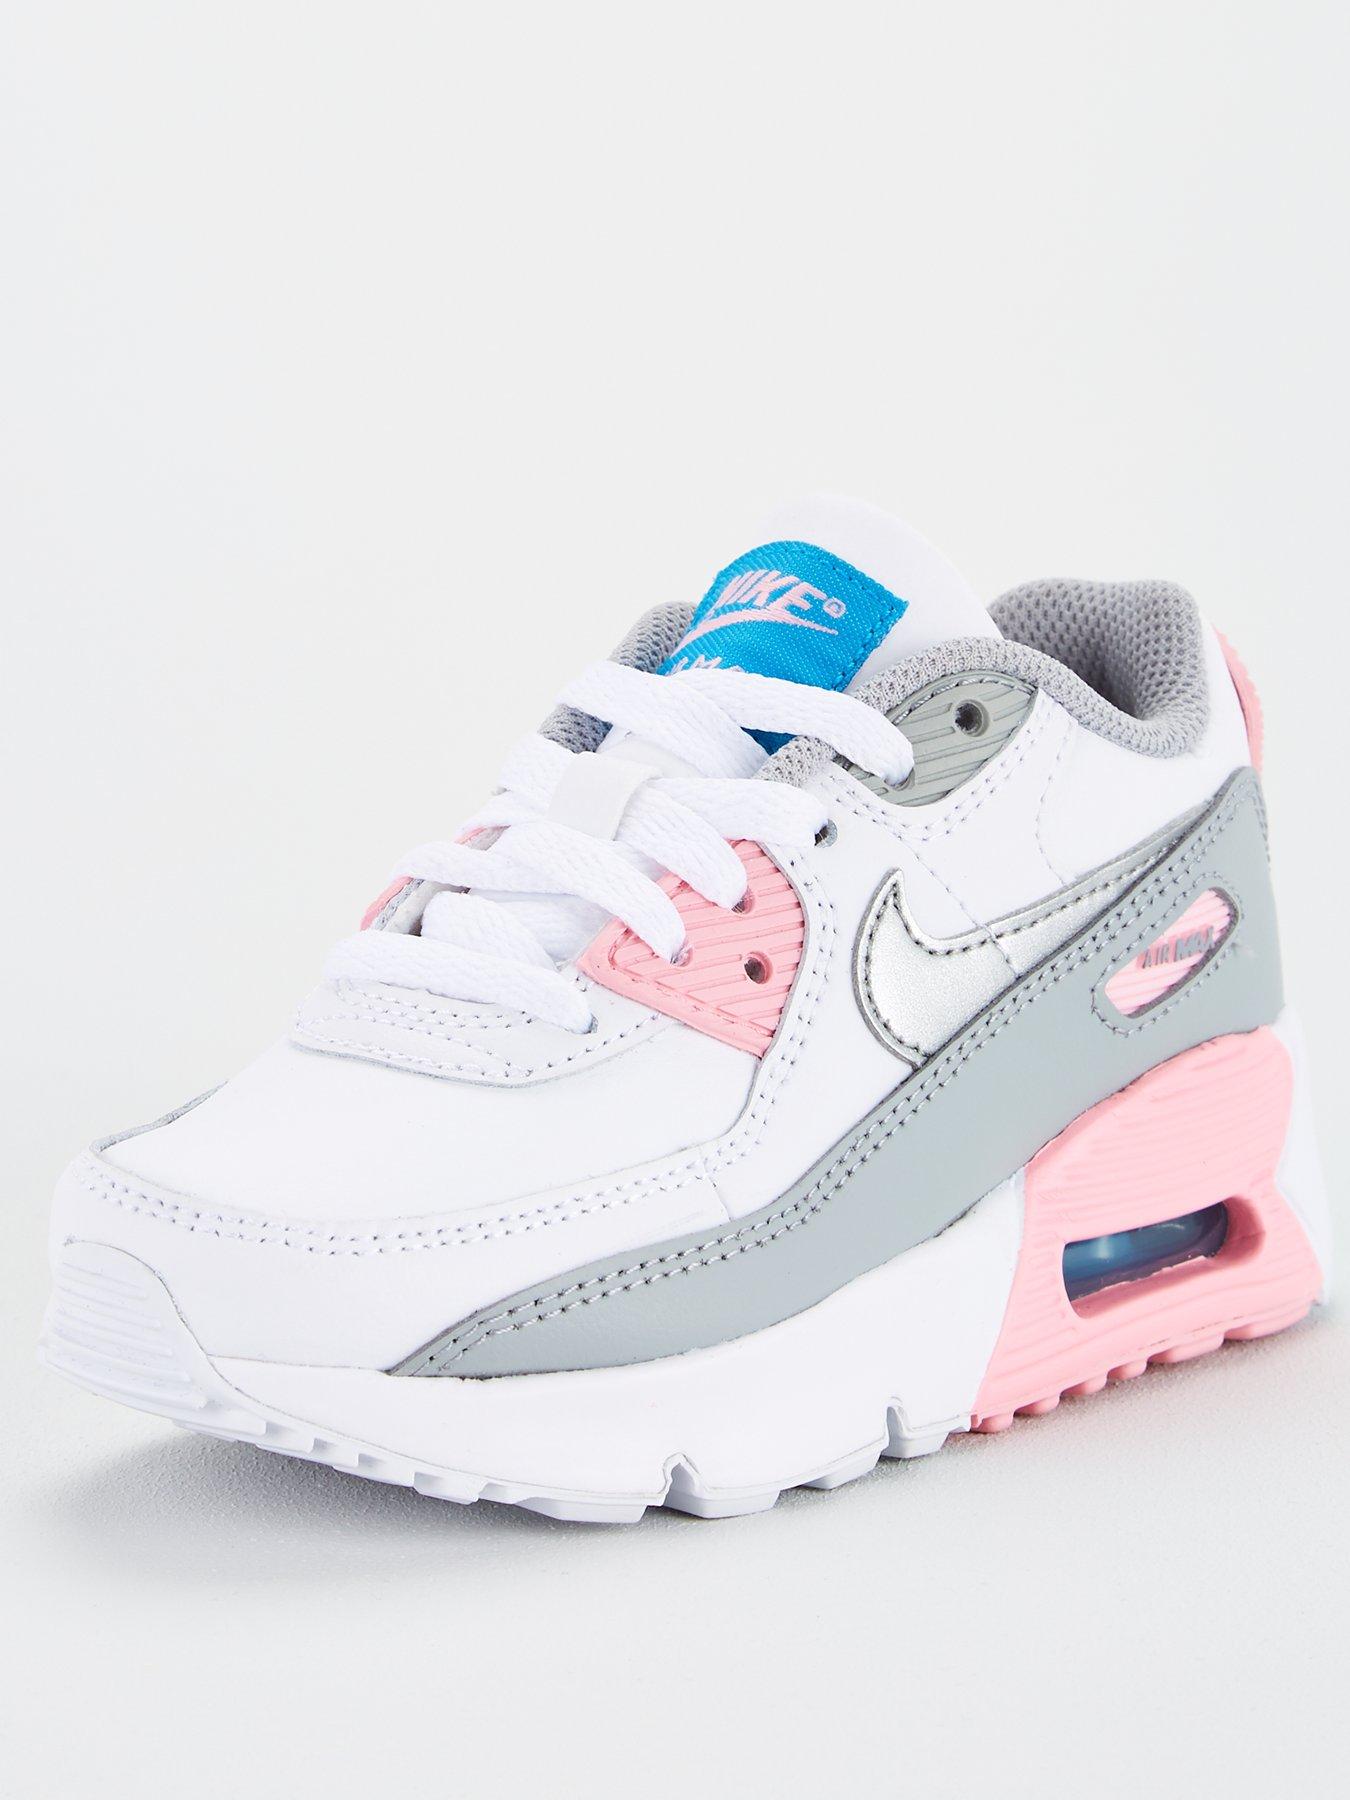 childrens nike air max 90 trainers